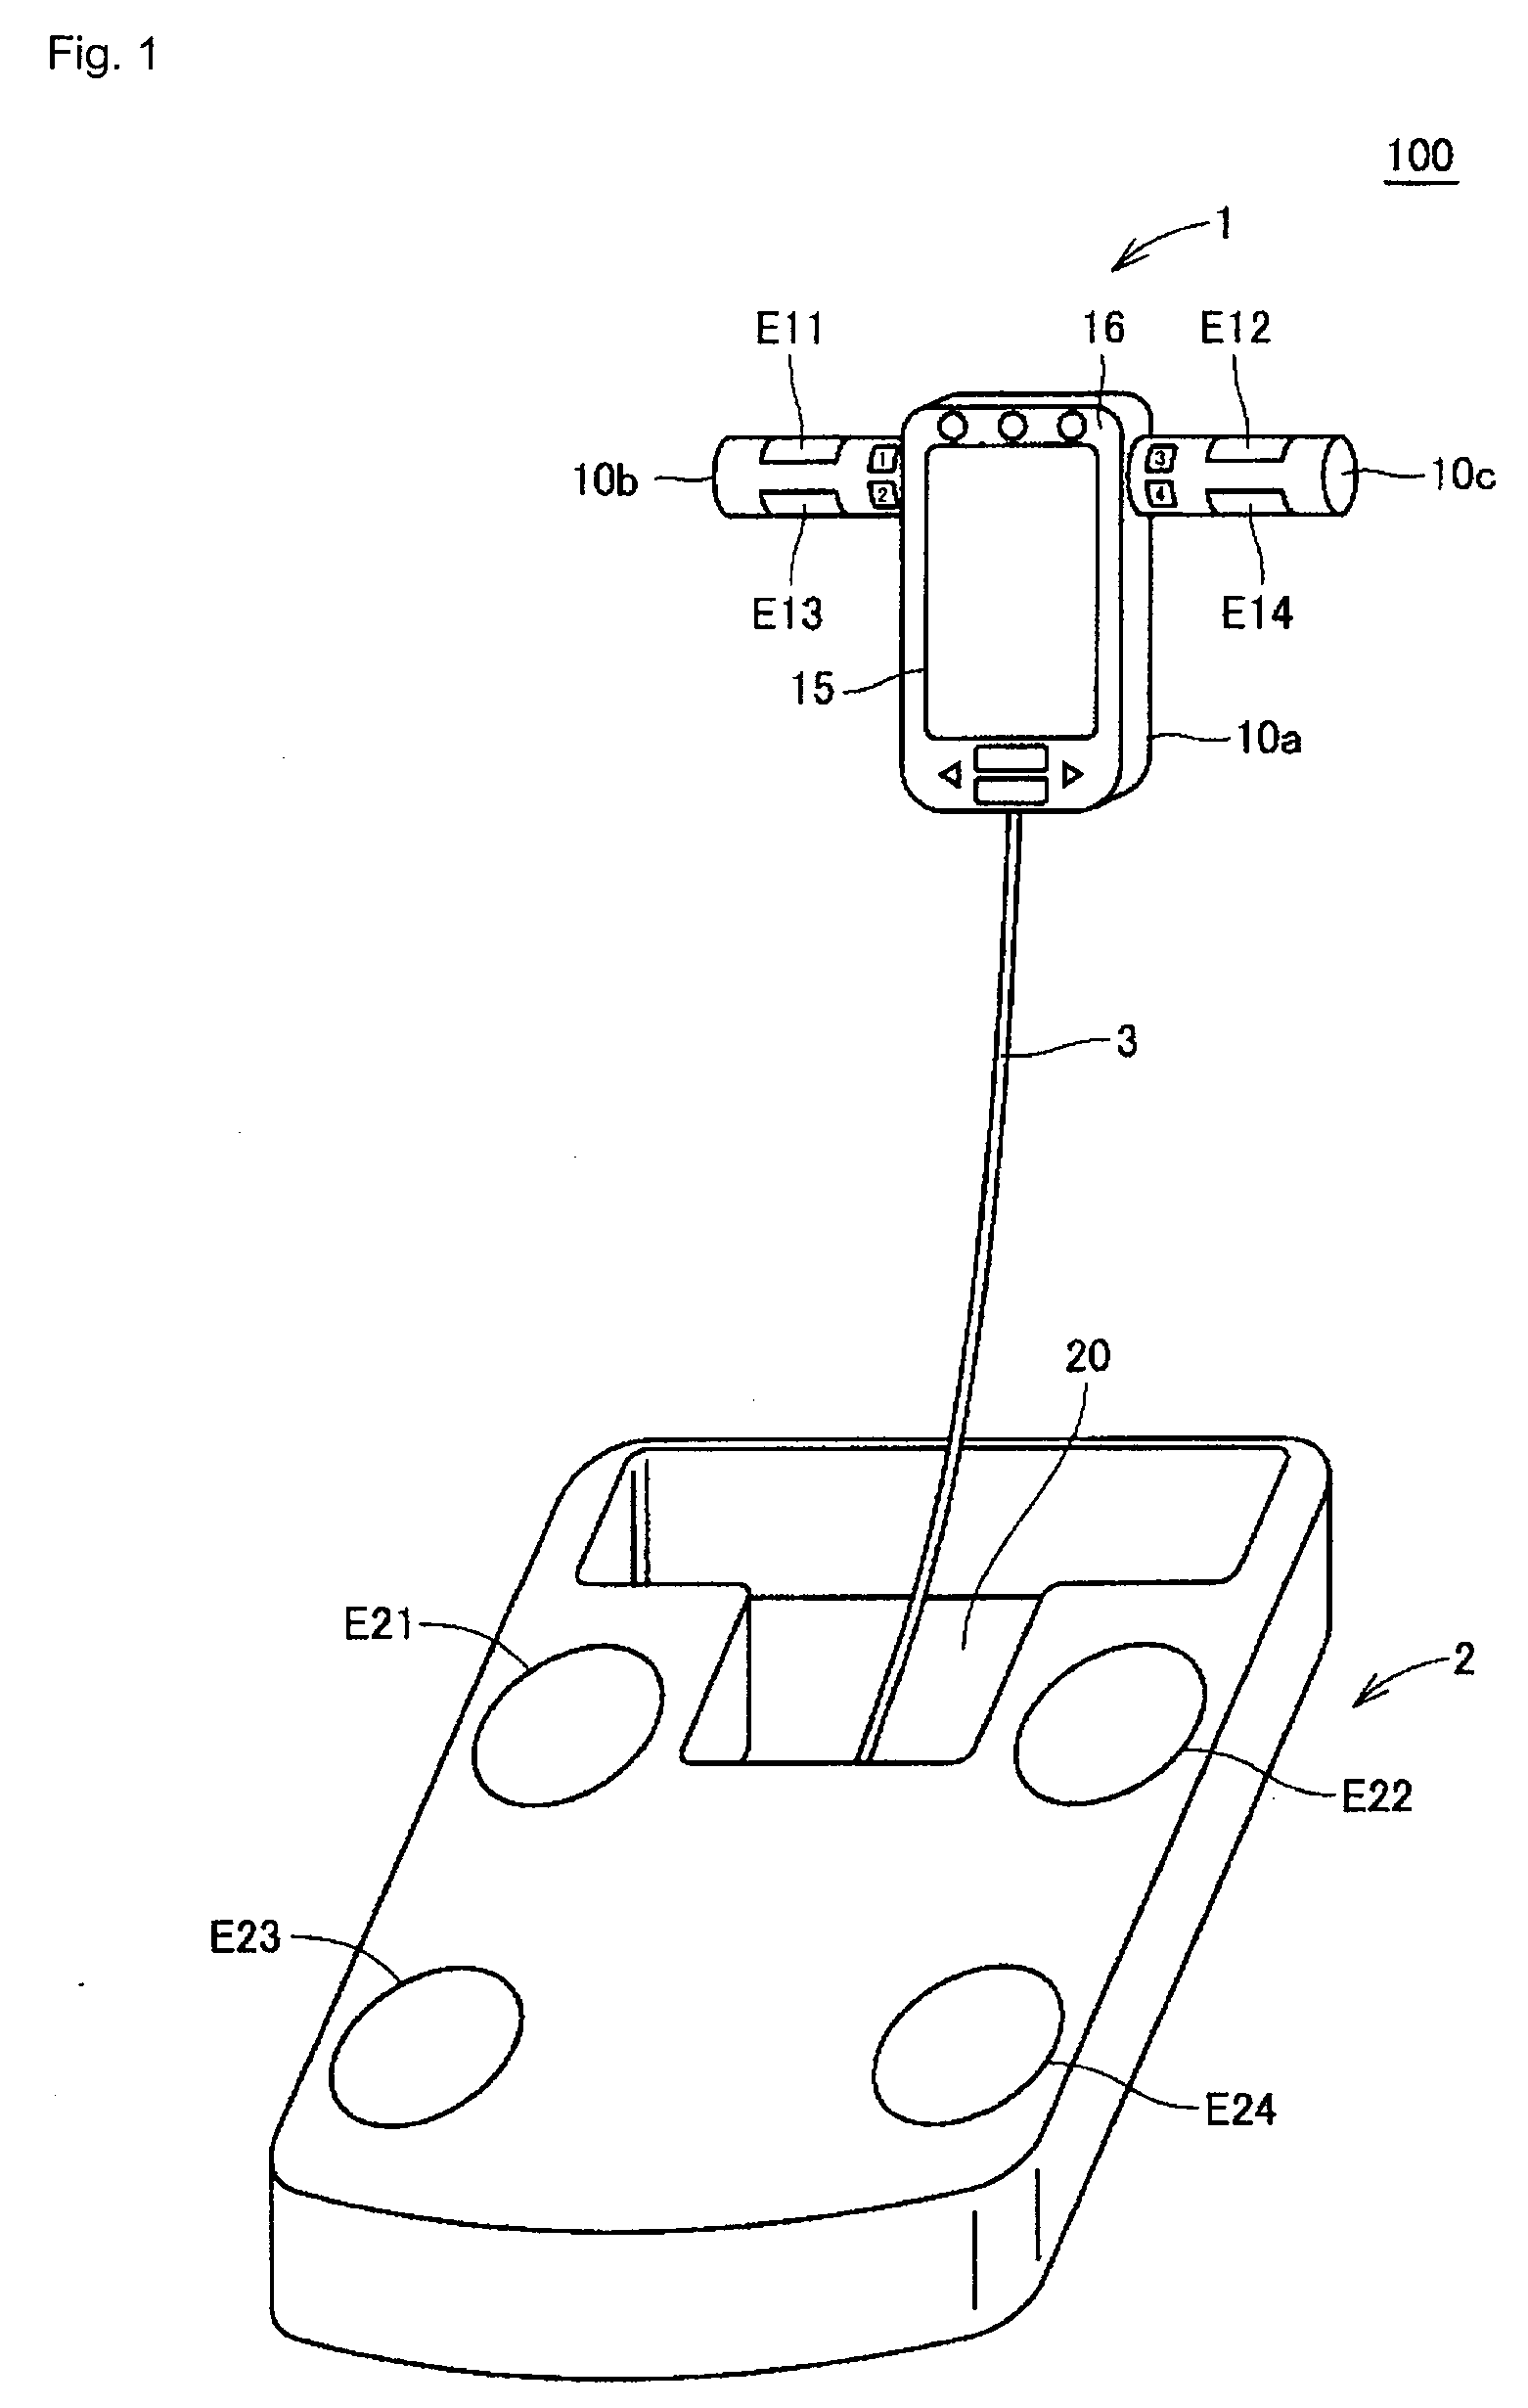 Body composition measuring instrument for recognizing changes in body composition